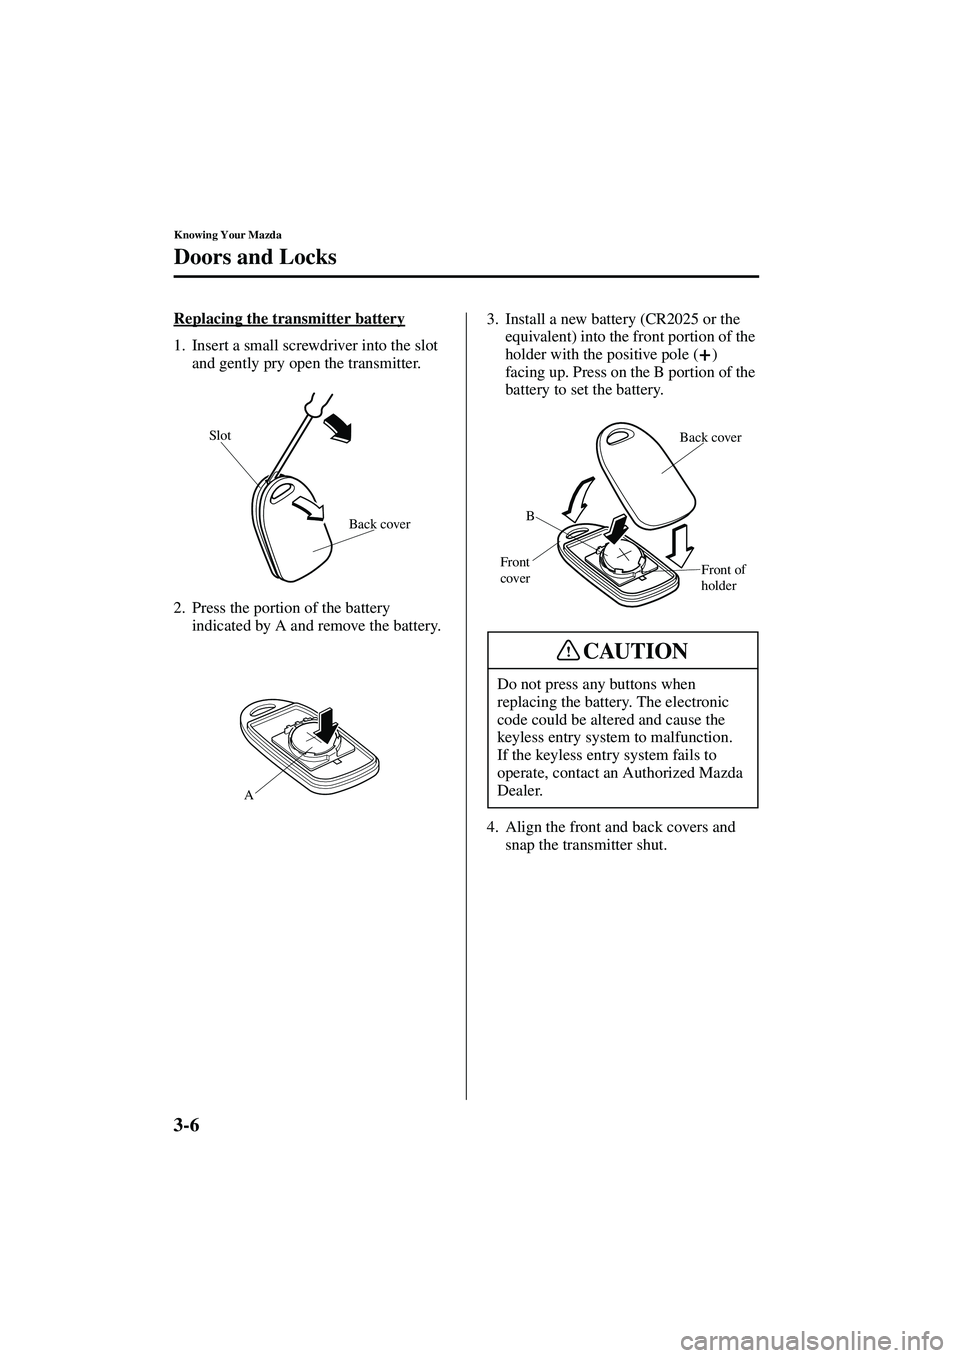 MAZDA MODEL MX-5 MIATA 2004  Owners Manual 3-6
Knowing Your Mazda
Doors and Locks
Form No. 8S15-EA-03G
Replacing the transmitter battery
1. Insert a small screwdriver into the slot and gently pry open the transmitter.
2. Press the portion of t